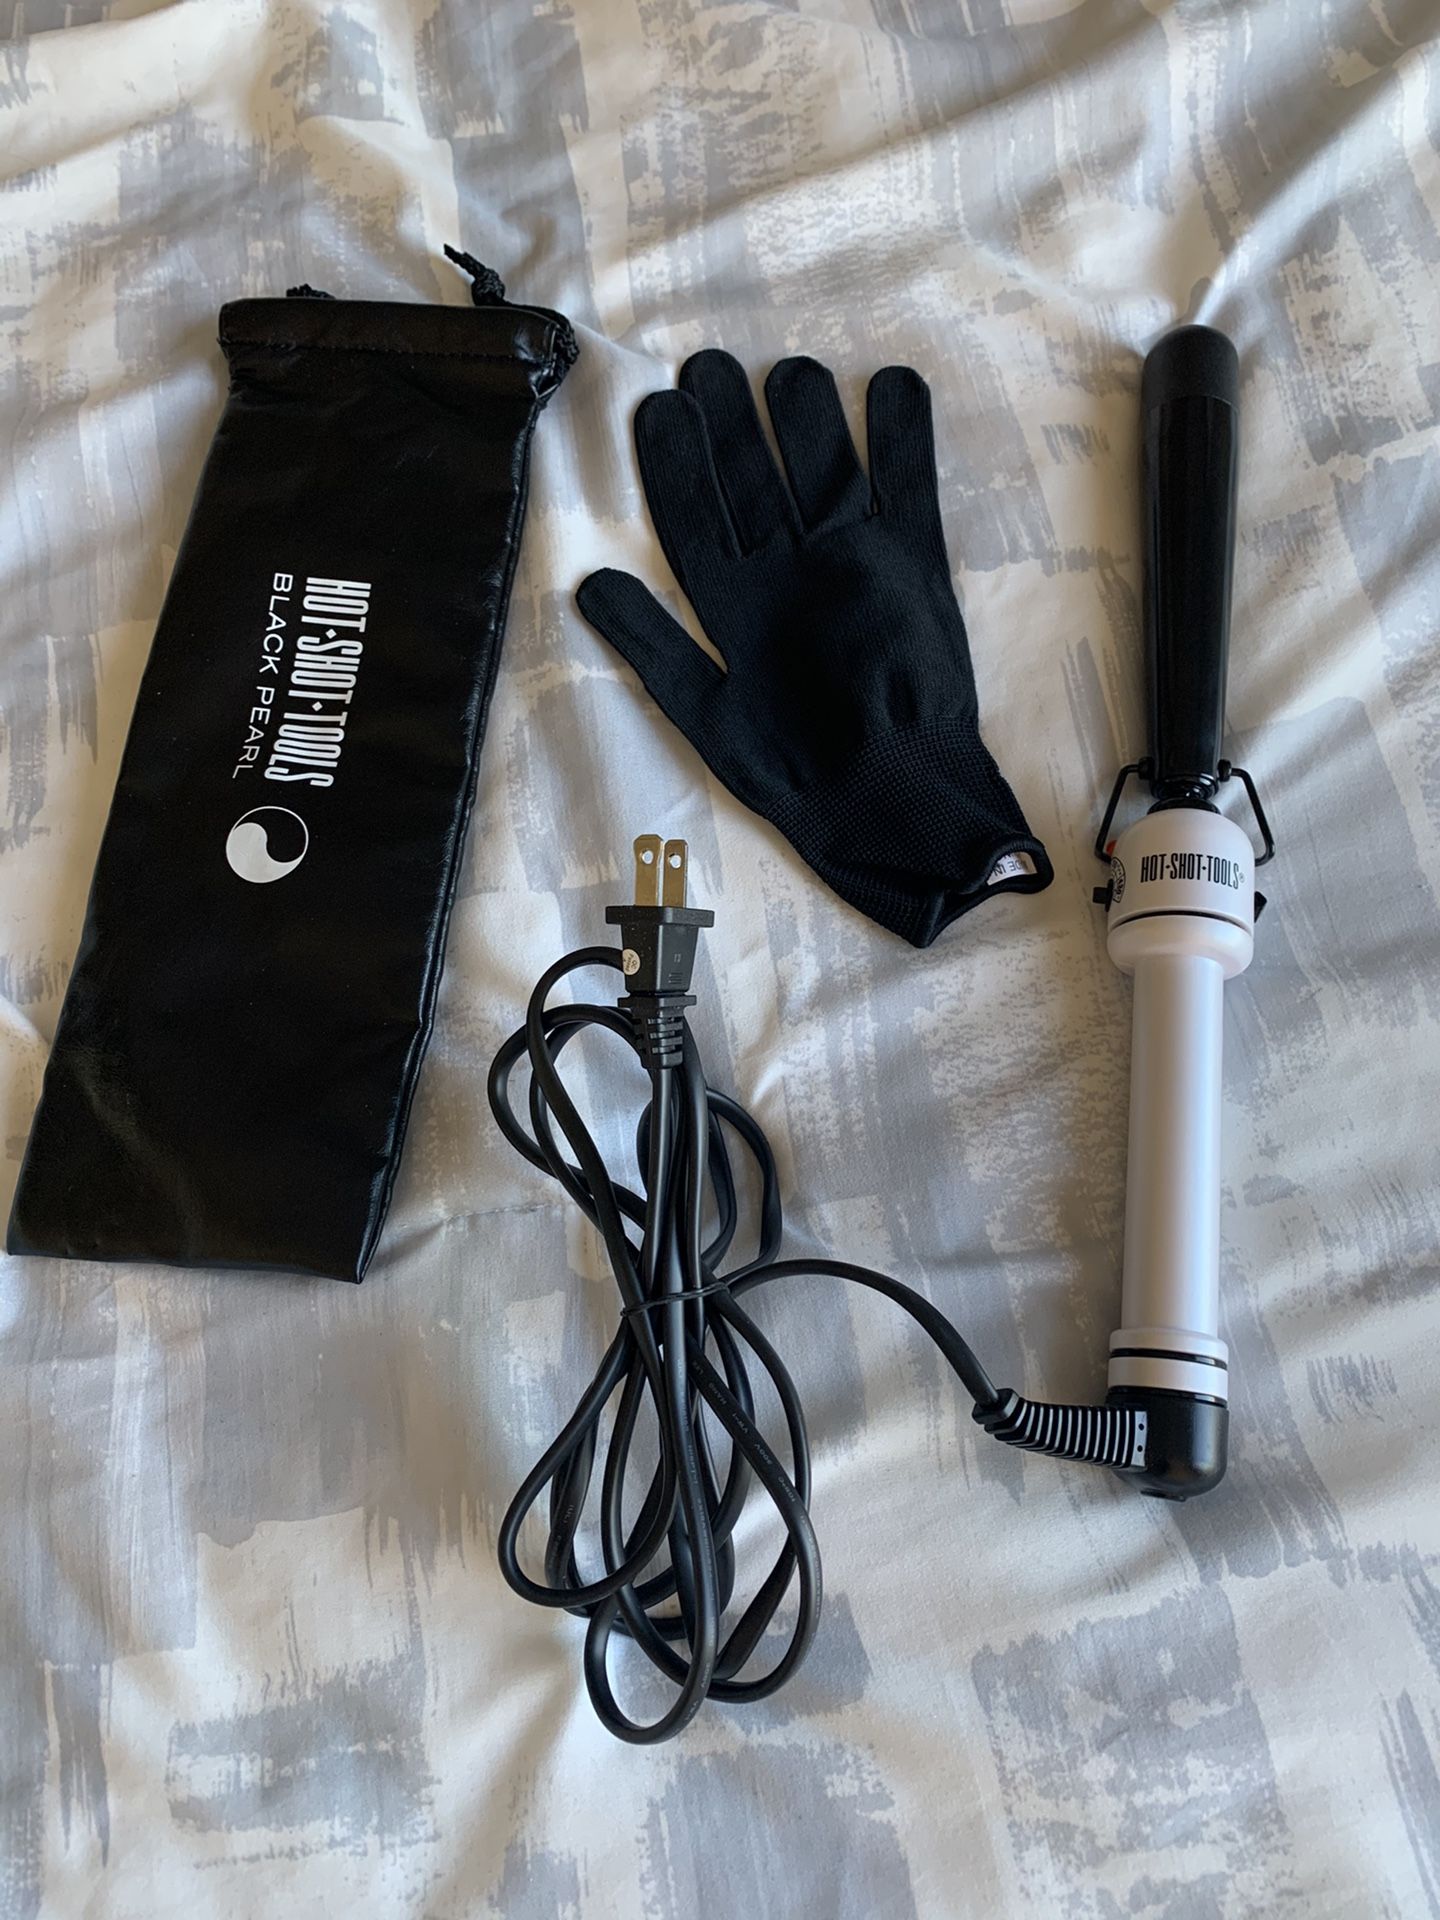 Hot shot curling wand and accessories